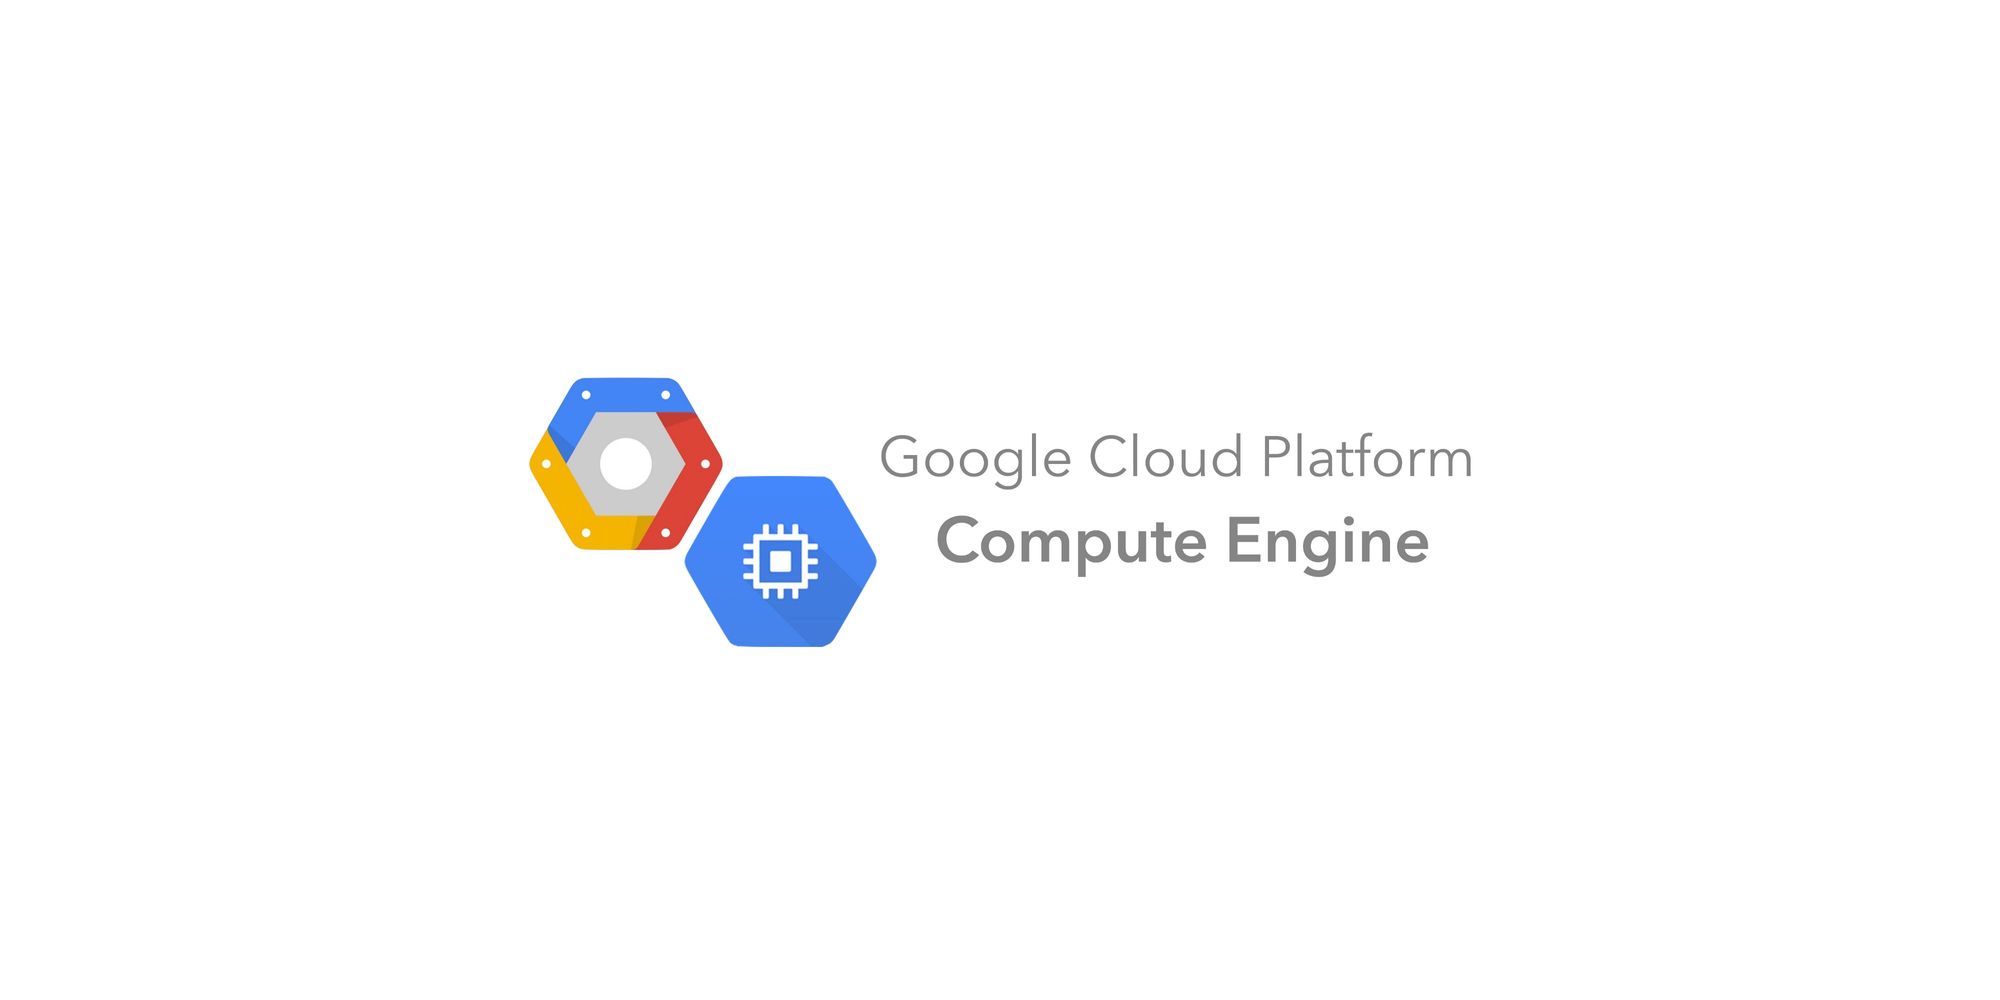 Hosting your website for free on Google Cloud